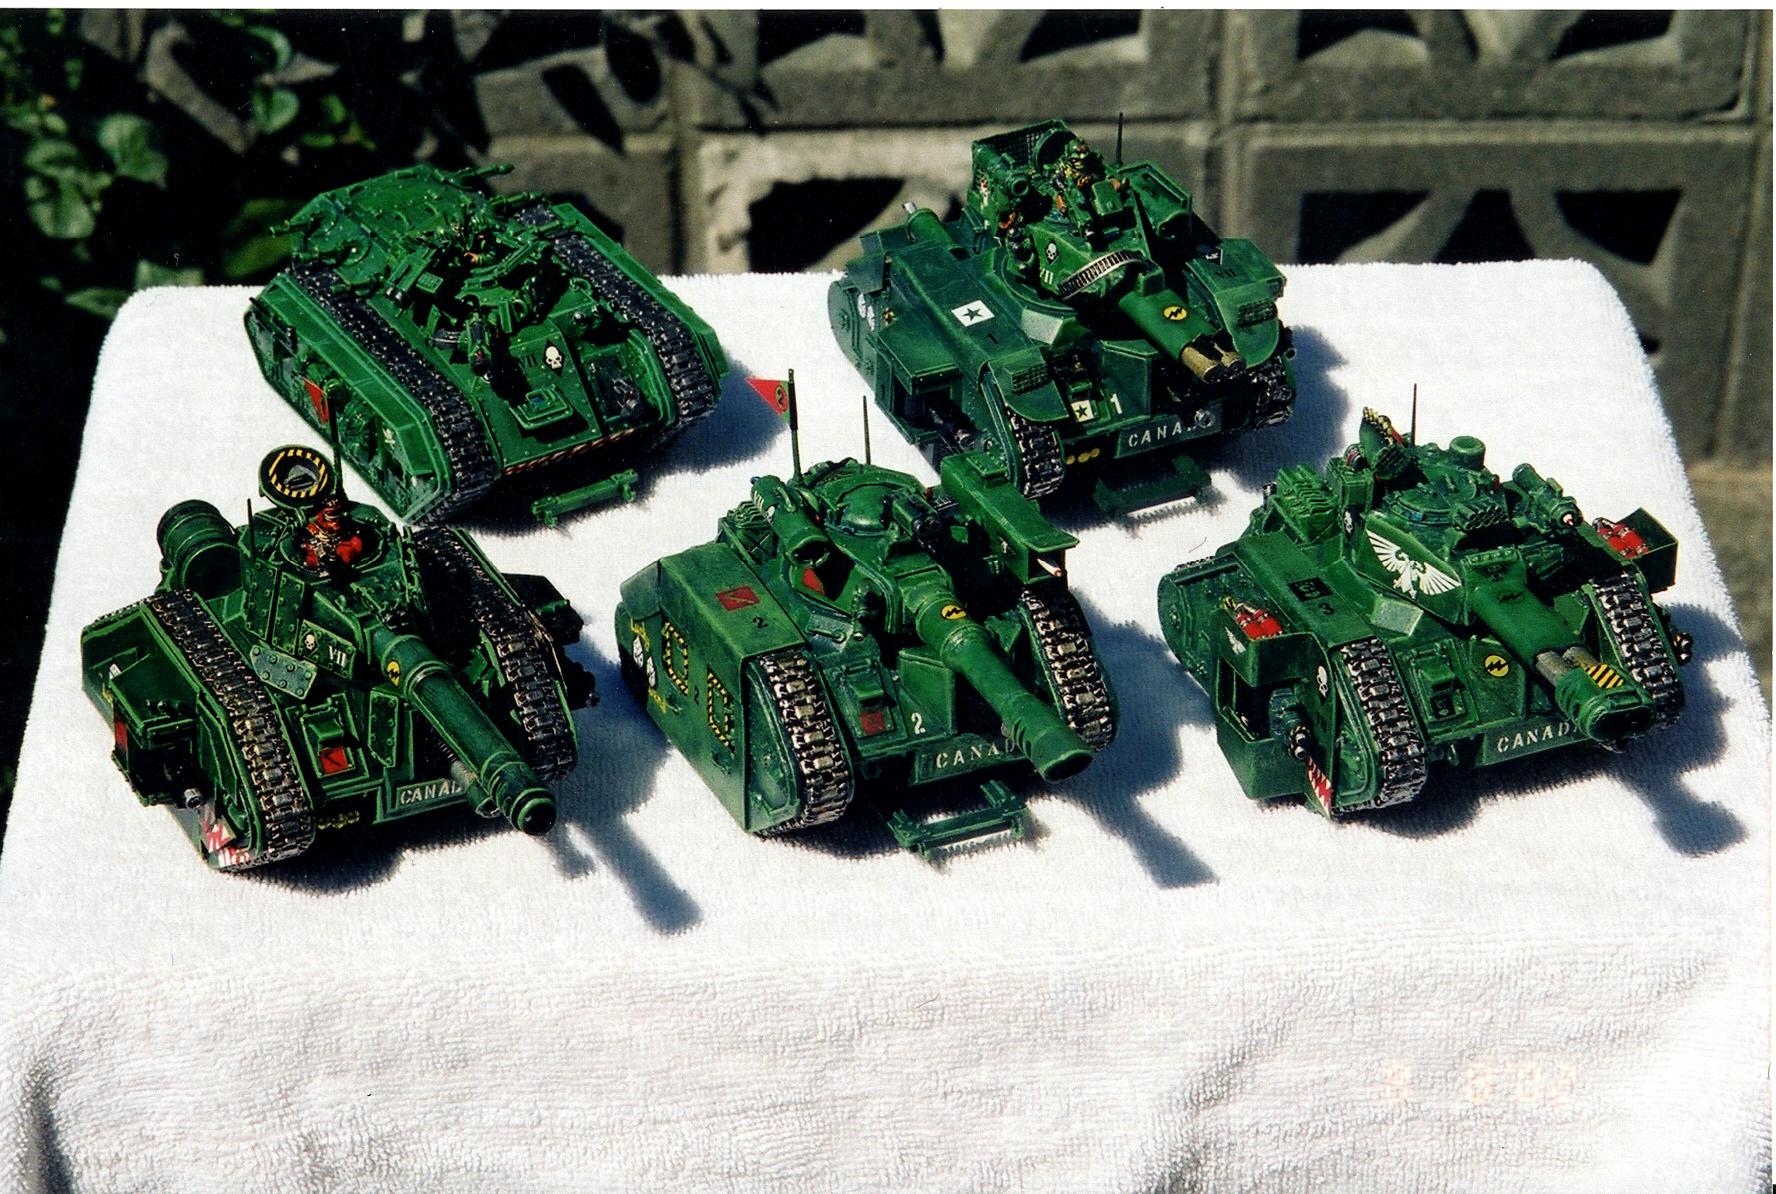 Armored Company, Chimera, Imperial Guard, Leman Russ